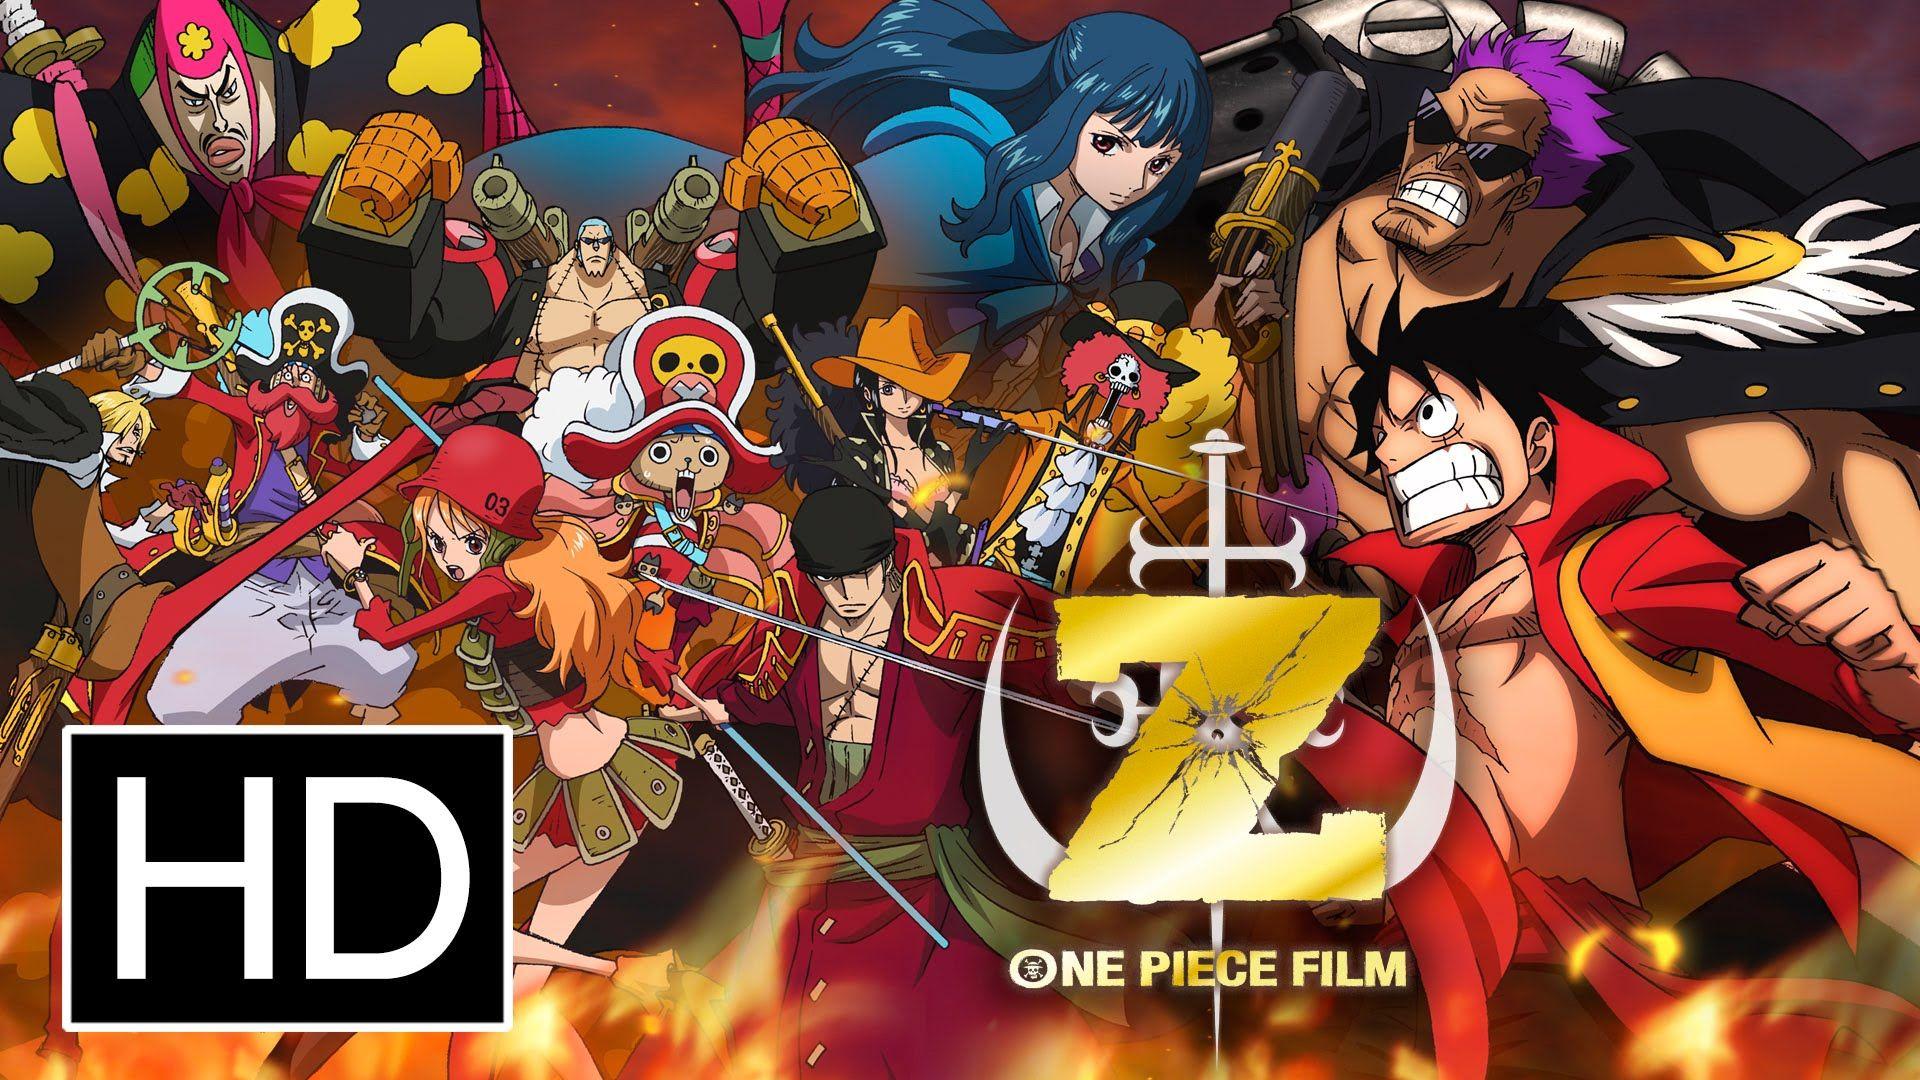 Zephyr - One piece Film Z  One piece games, Piecings, One piece images